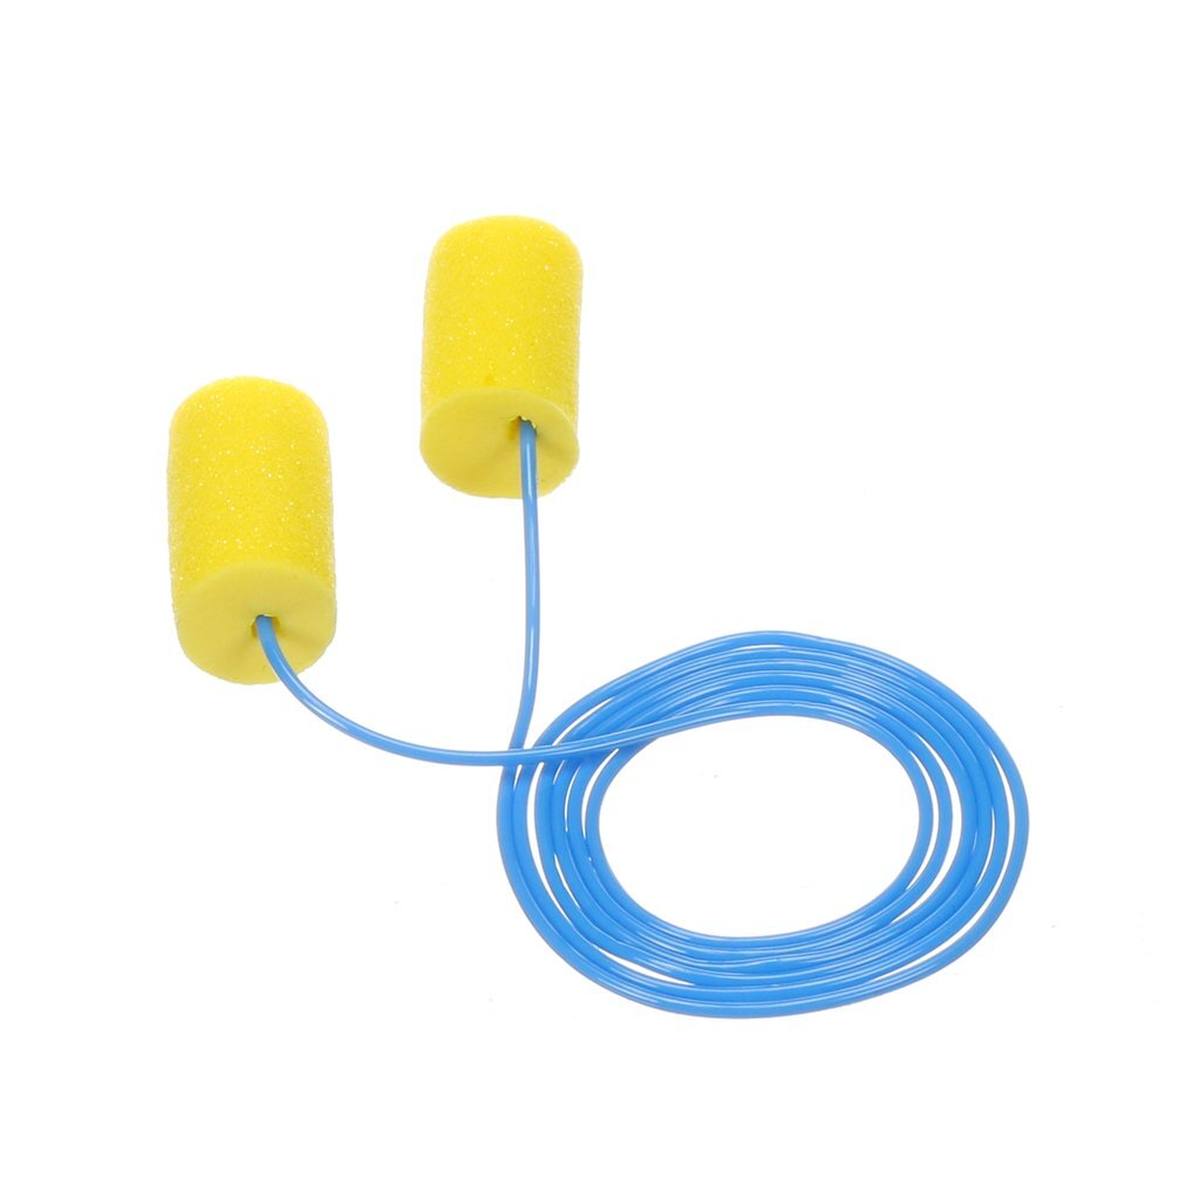 3M E-A-R Classic II, with cord, SNR=29 dB, in pairs in polybag CC01000